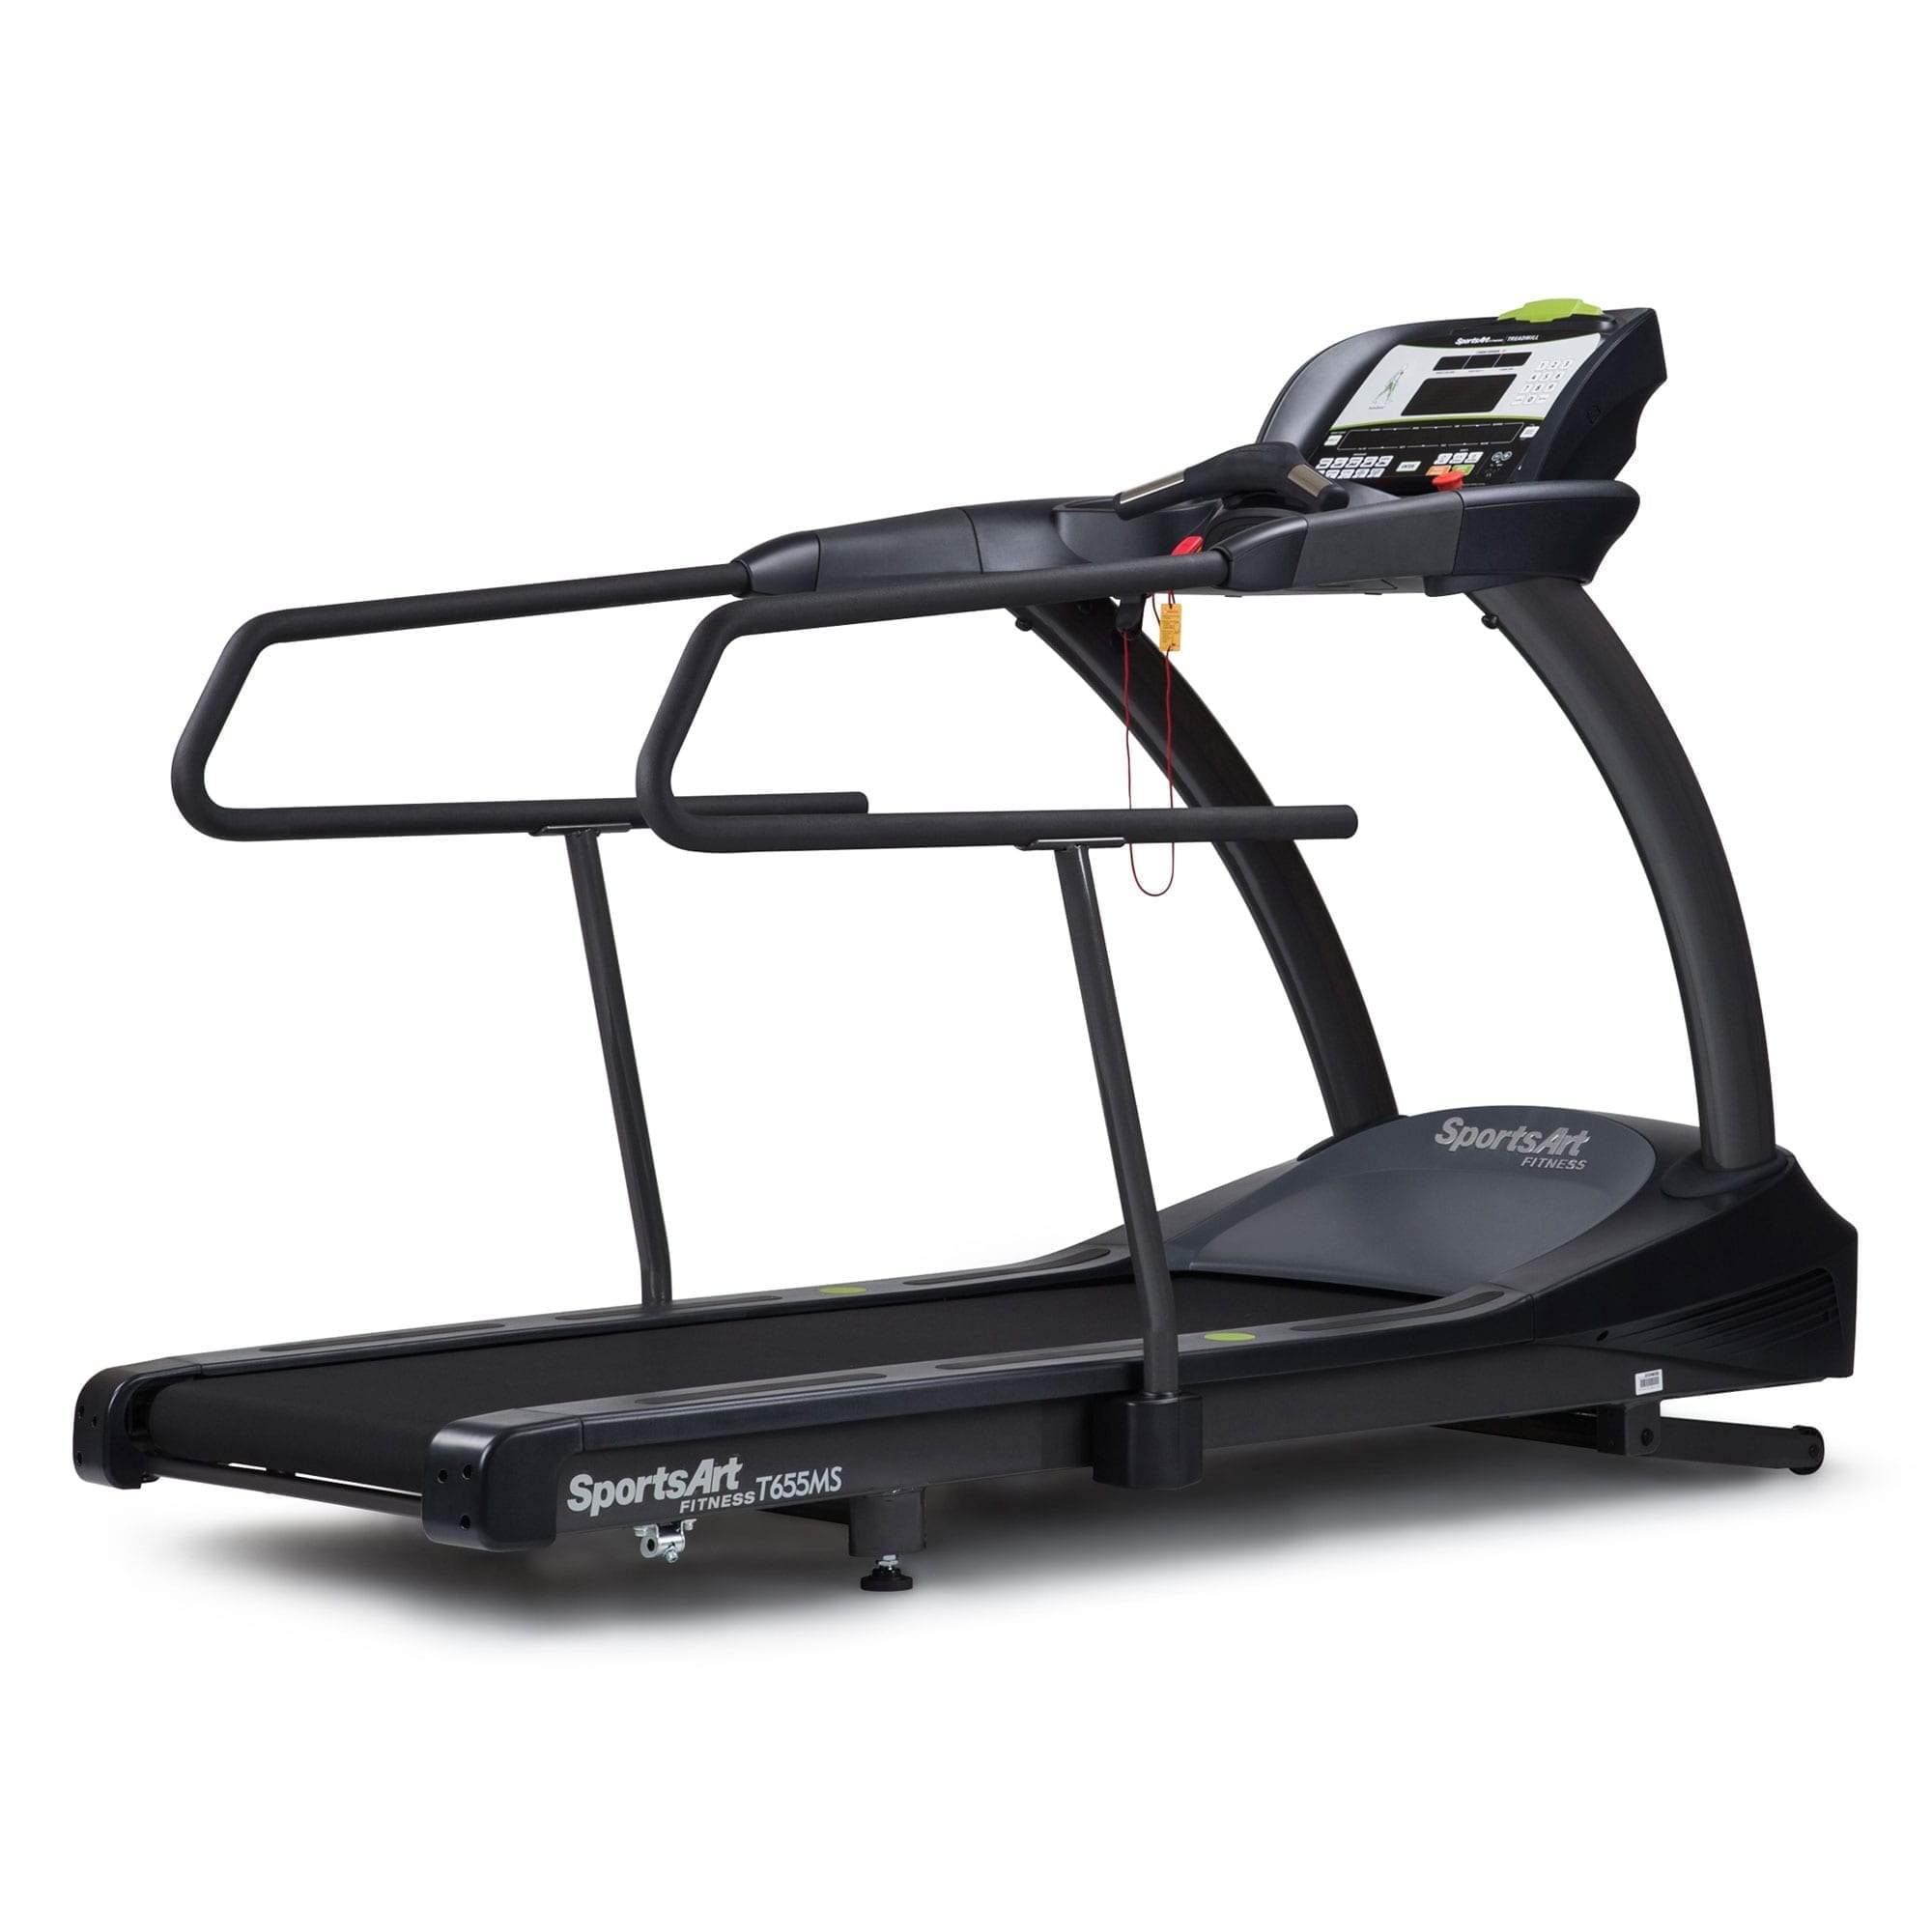 SportsArts Medical Treadmill T655MS side view angled with console toward the right hand side 